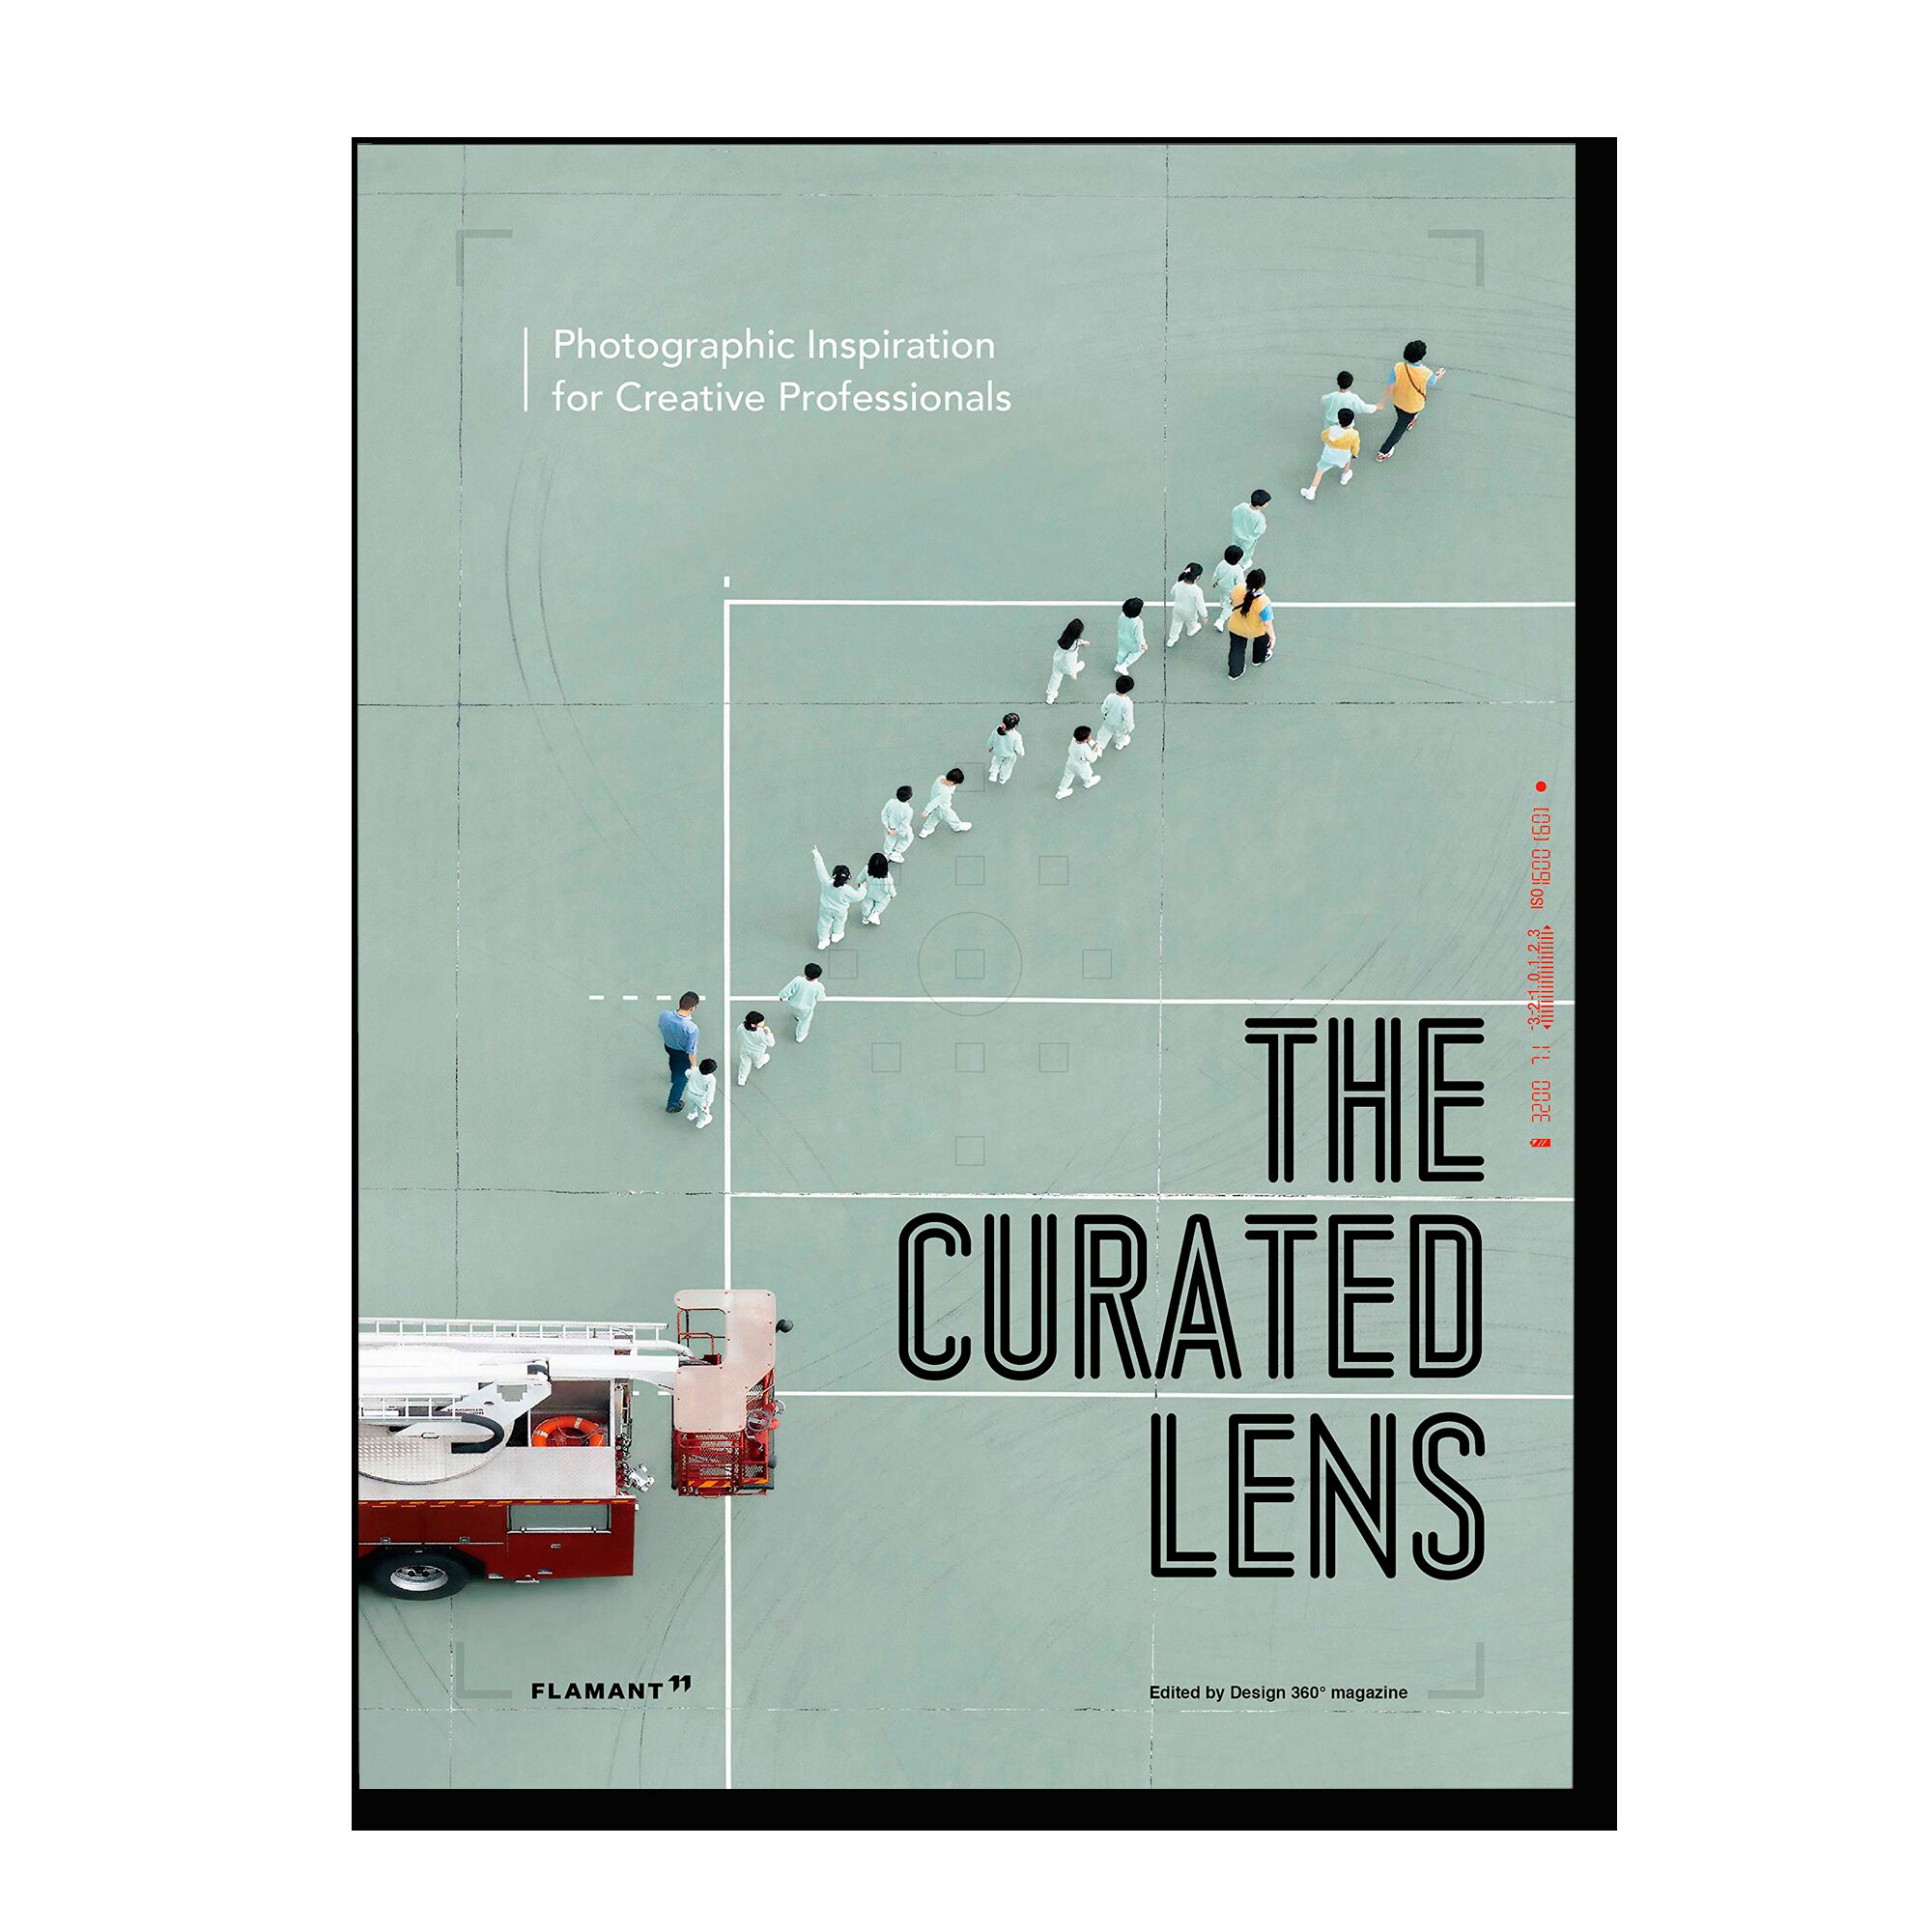 The Curated Lens: Photographic Inspiration for Creative Professionals